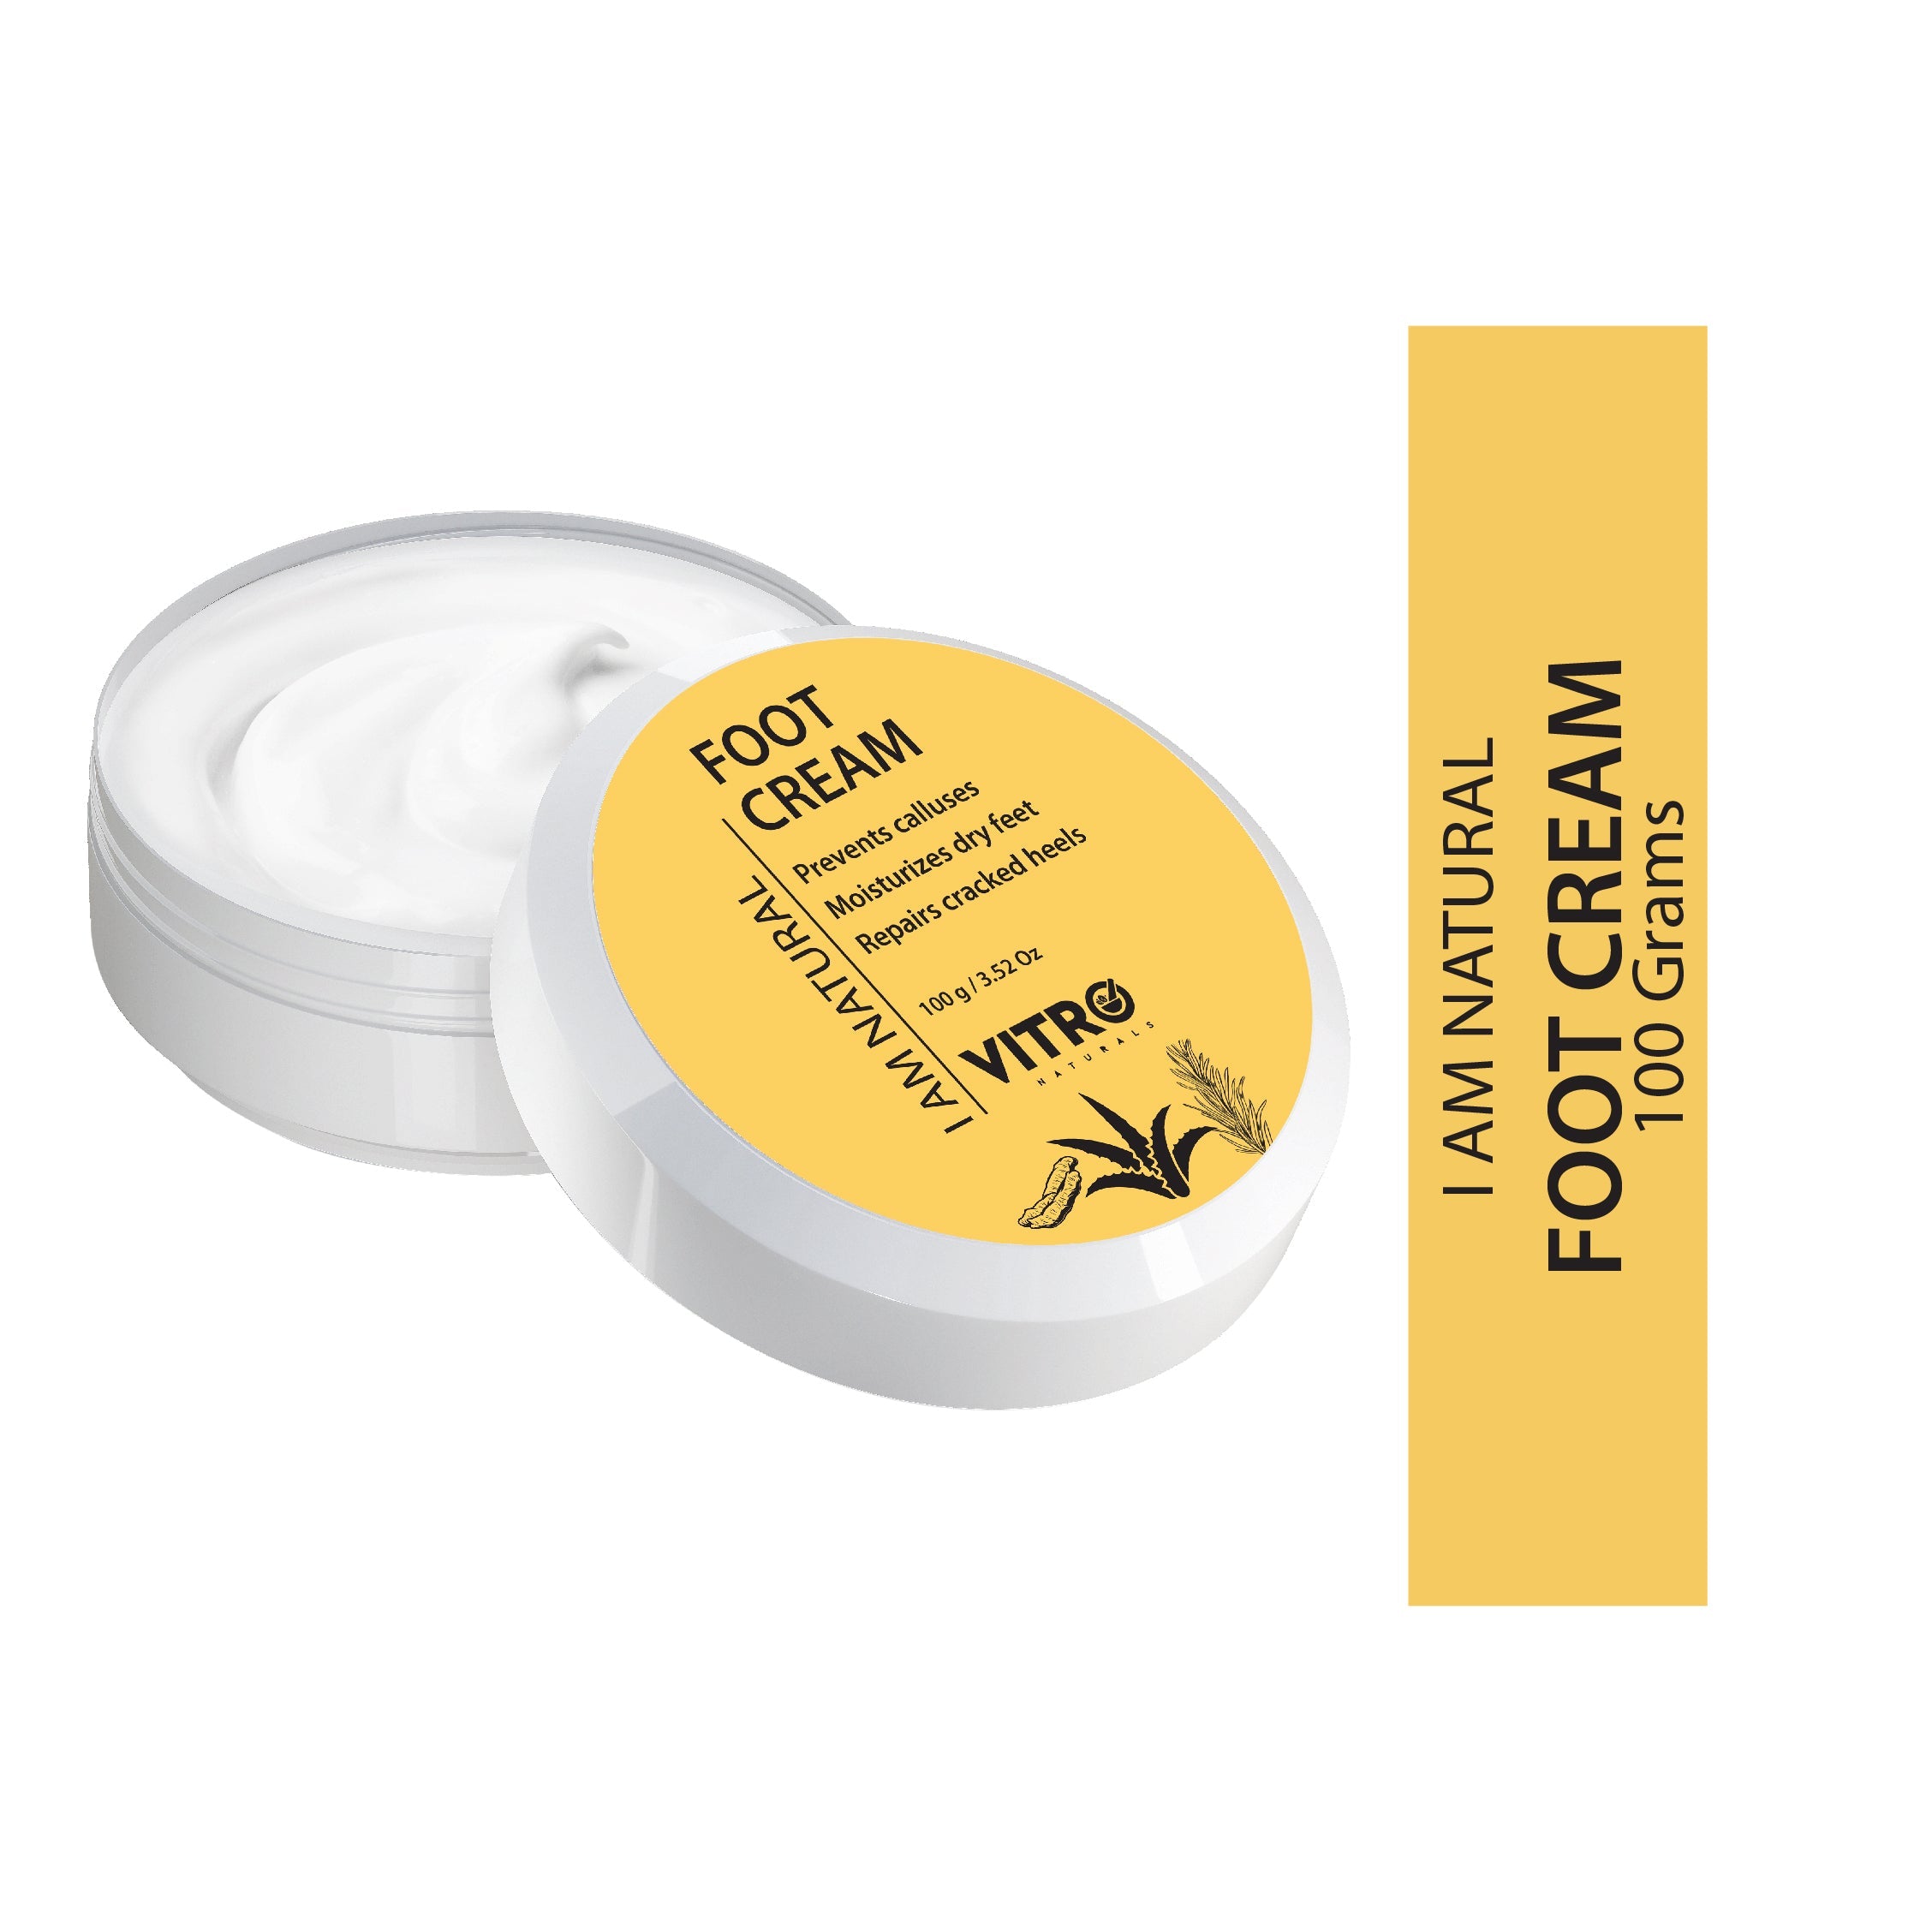 Matra Foot Cream for Cracked Heels and Dry Feet with Aloe Vera & Tea Tree  Oil : Amazon.in: Health & Personal Care